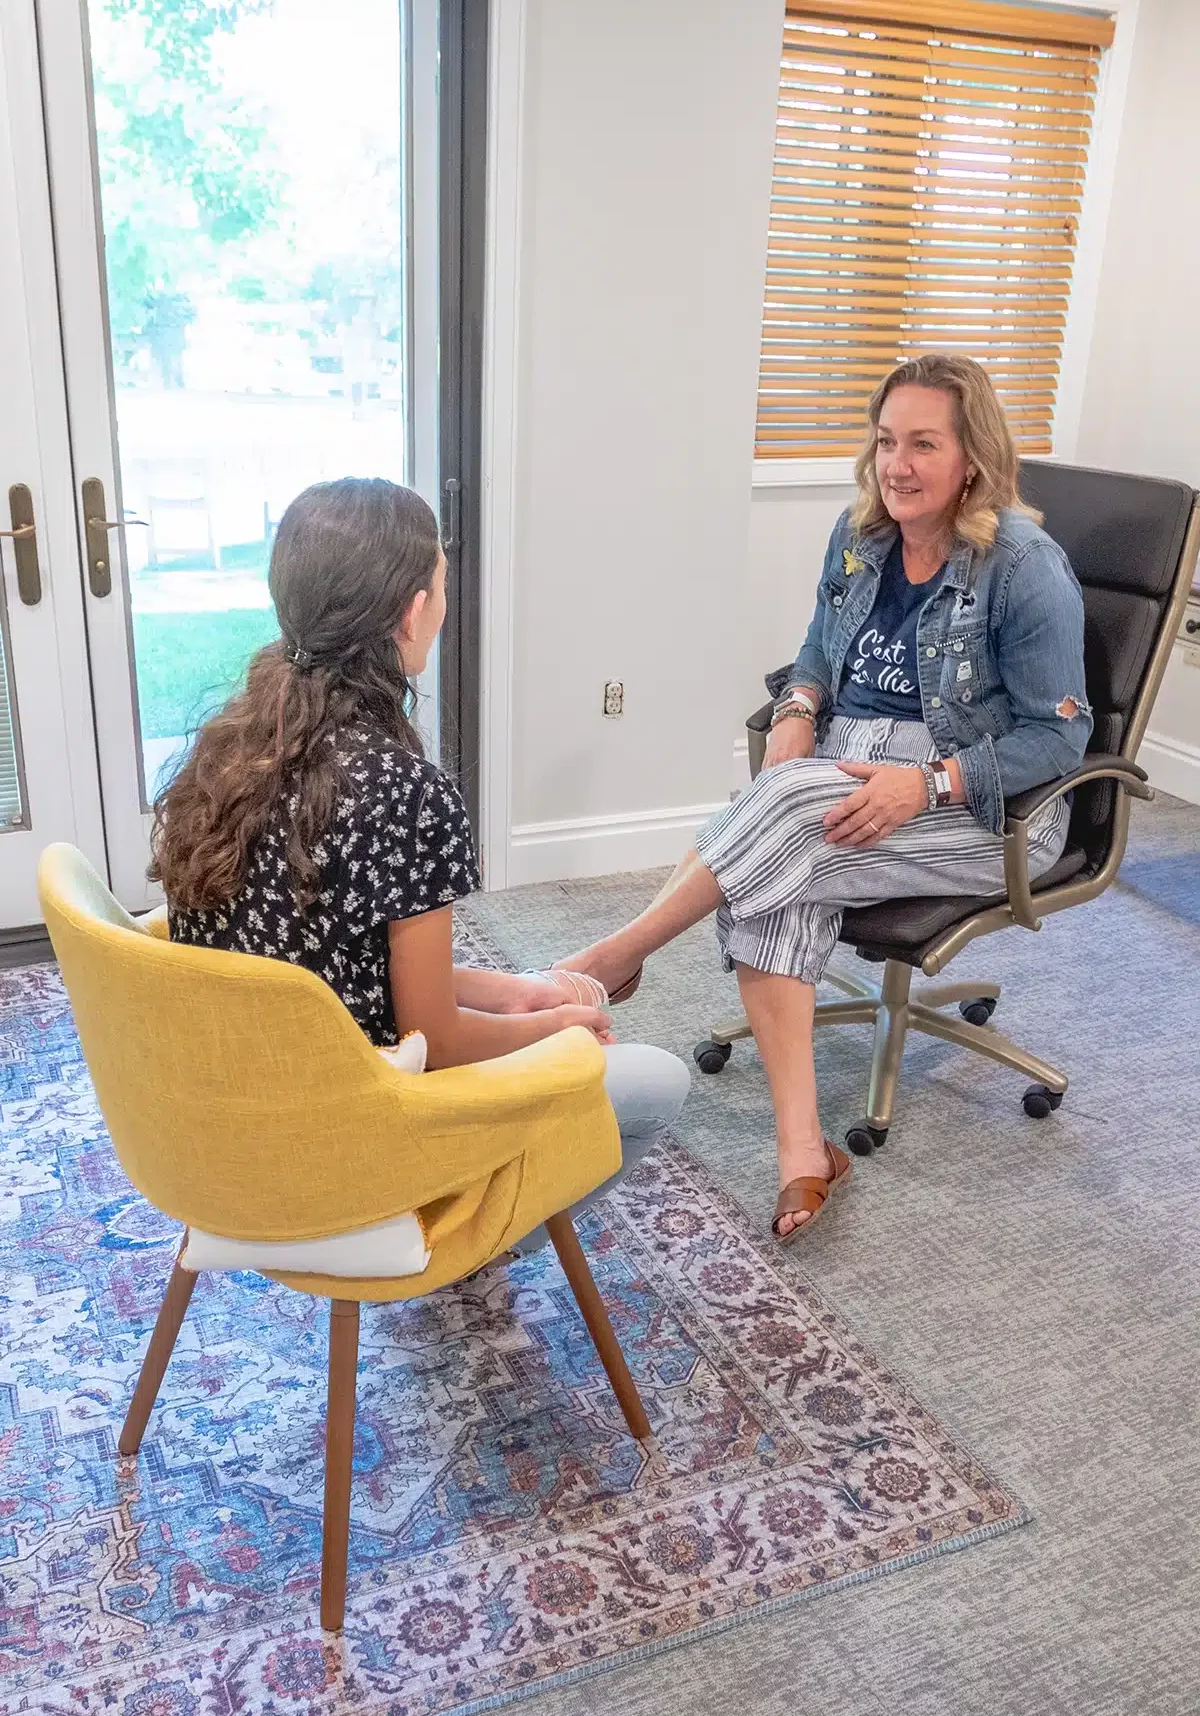 A teen participates in an individual therapy session while attending a day treatment program | Oasis Ascent